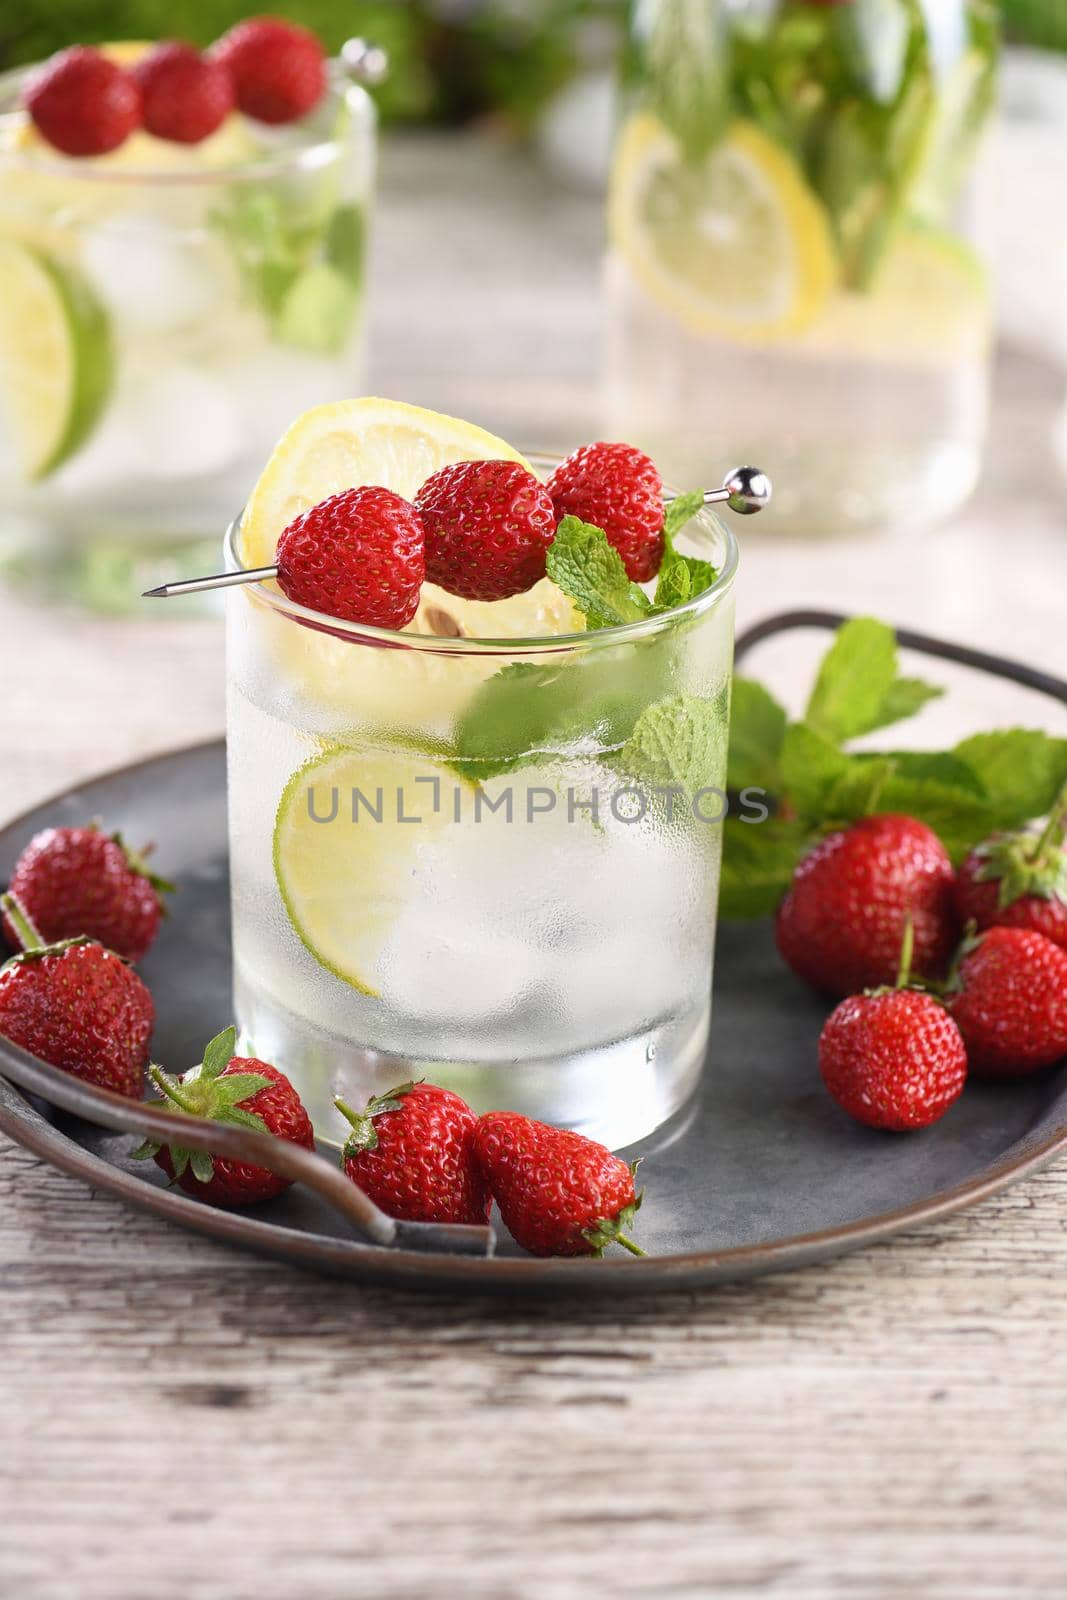 Refreshing organic Mojito cocktail with fresh lime, white rum combined with fresh strawberry and mint. This is the perfect cocktail for summer days.